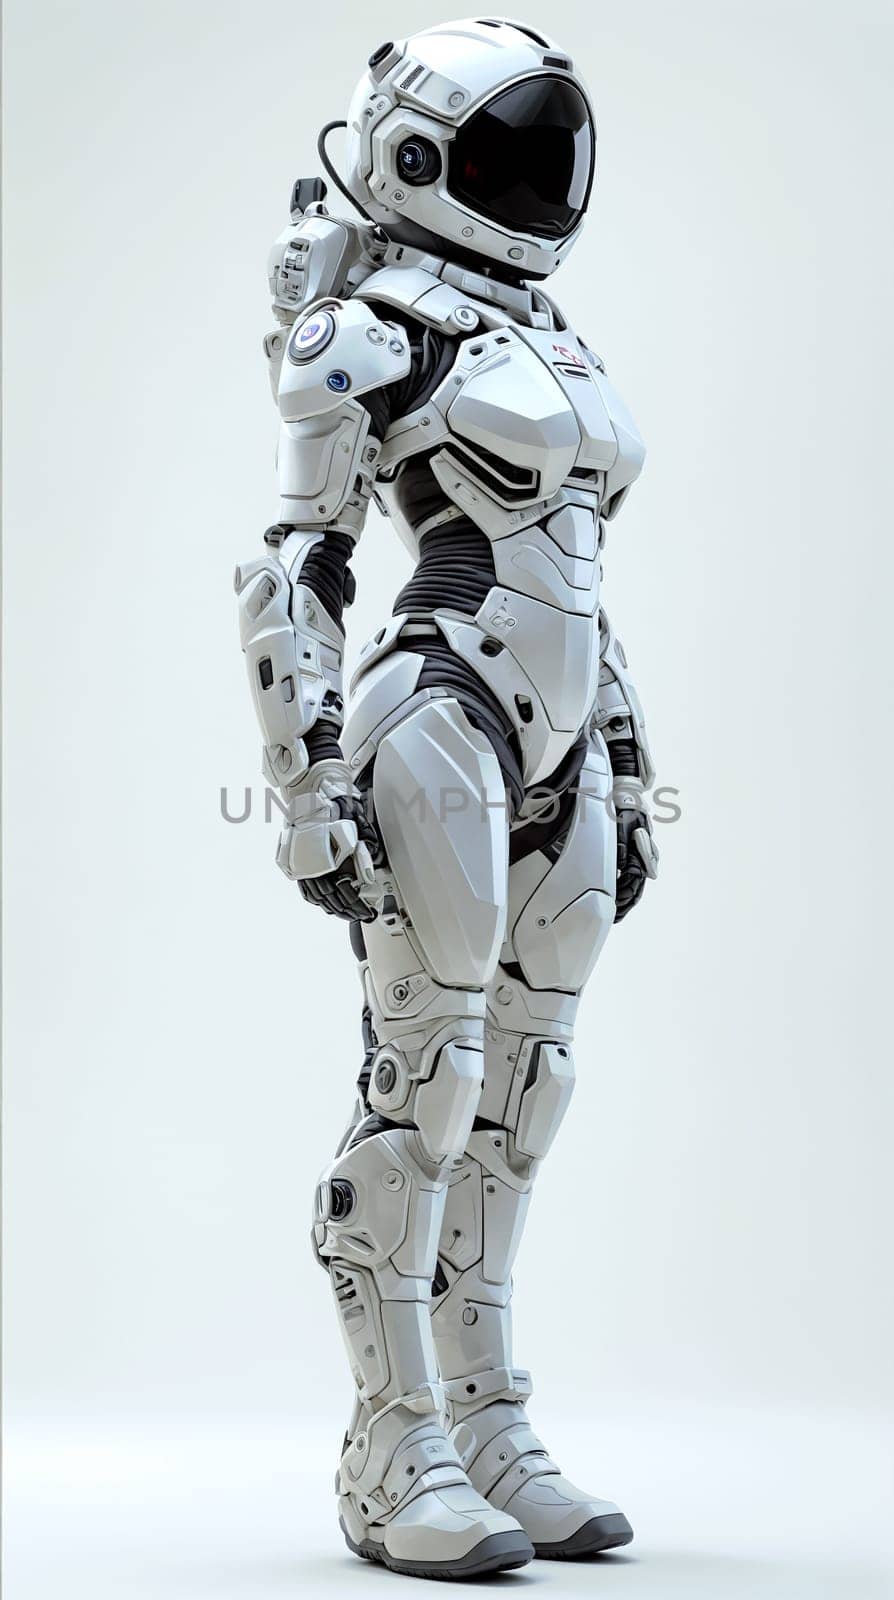 Sleek white robot with futuristic design and helmet by chrisroll